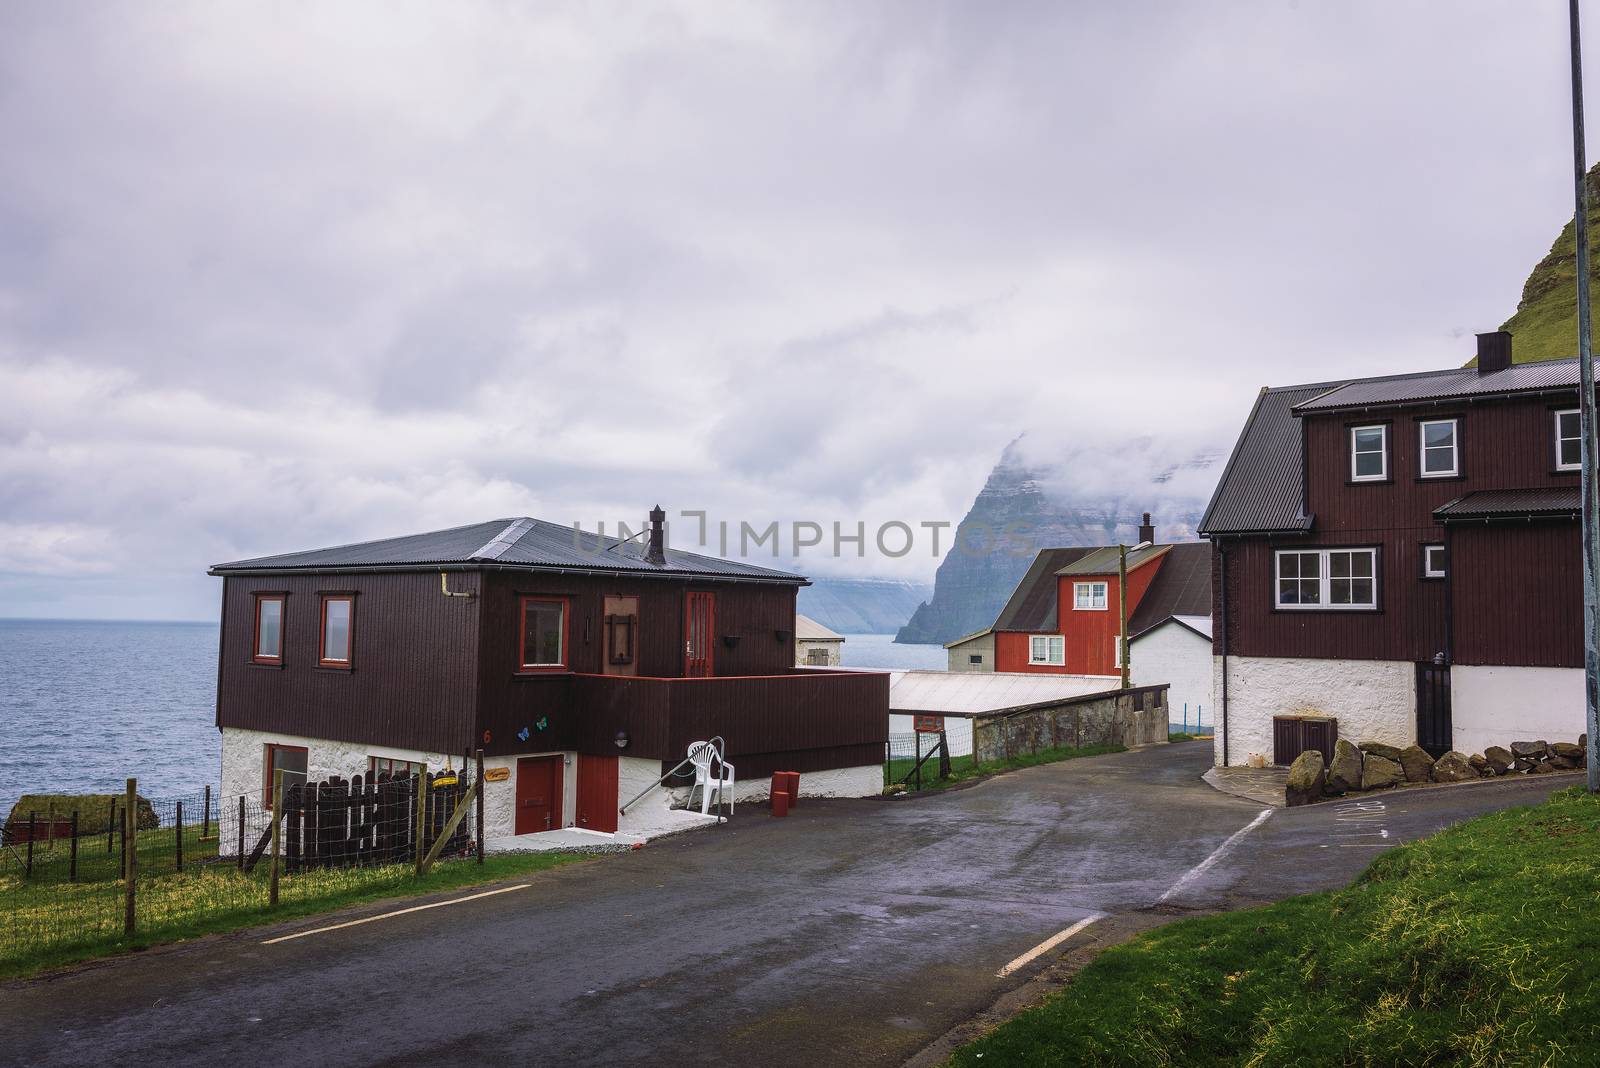 Trollanes, Faroe Islands, Denmark - May 27, 2019 : Small village of Trollanes located on the island of Kalsoy with huge cliffs of neighboring islands in the background.